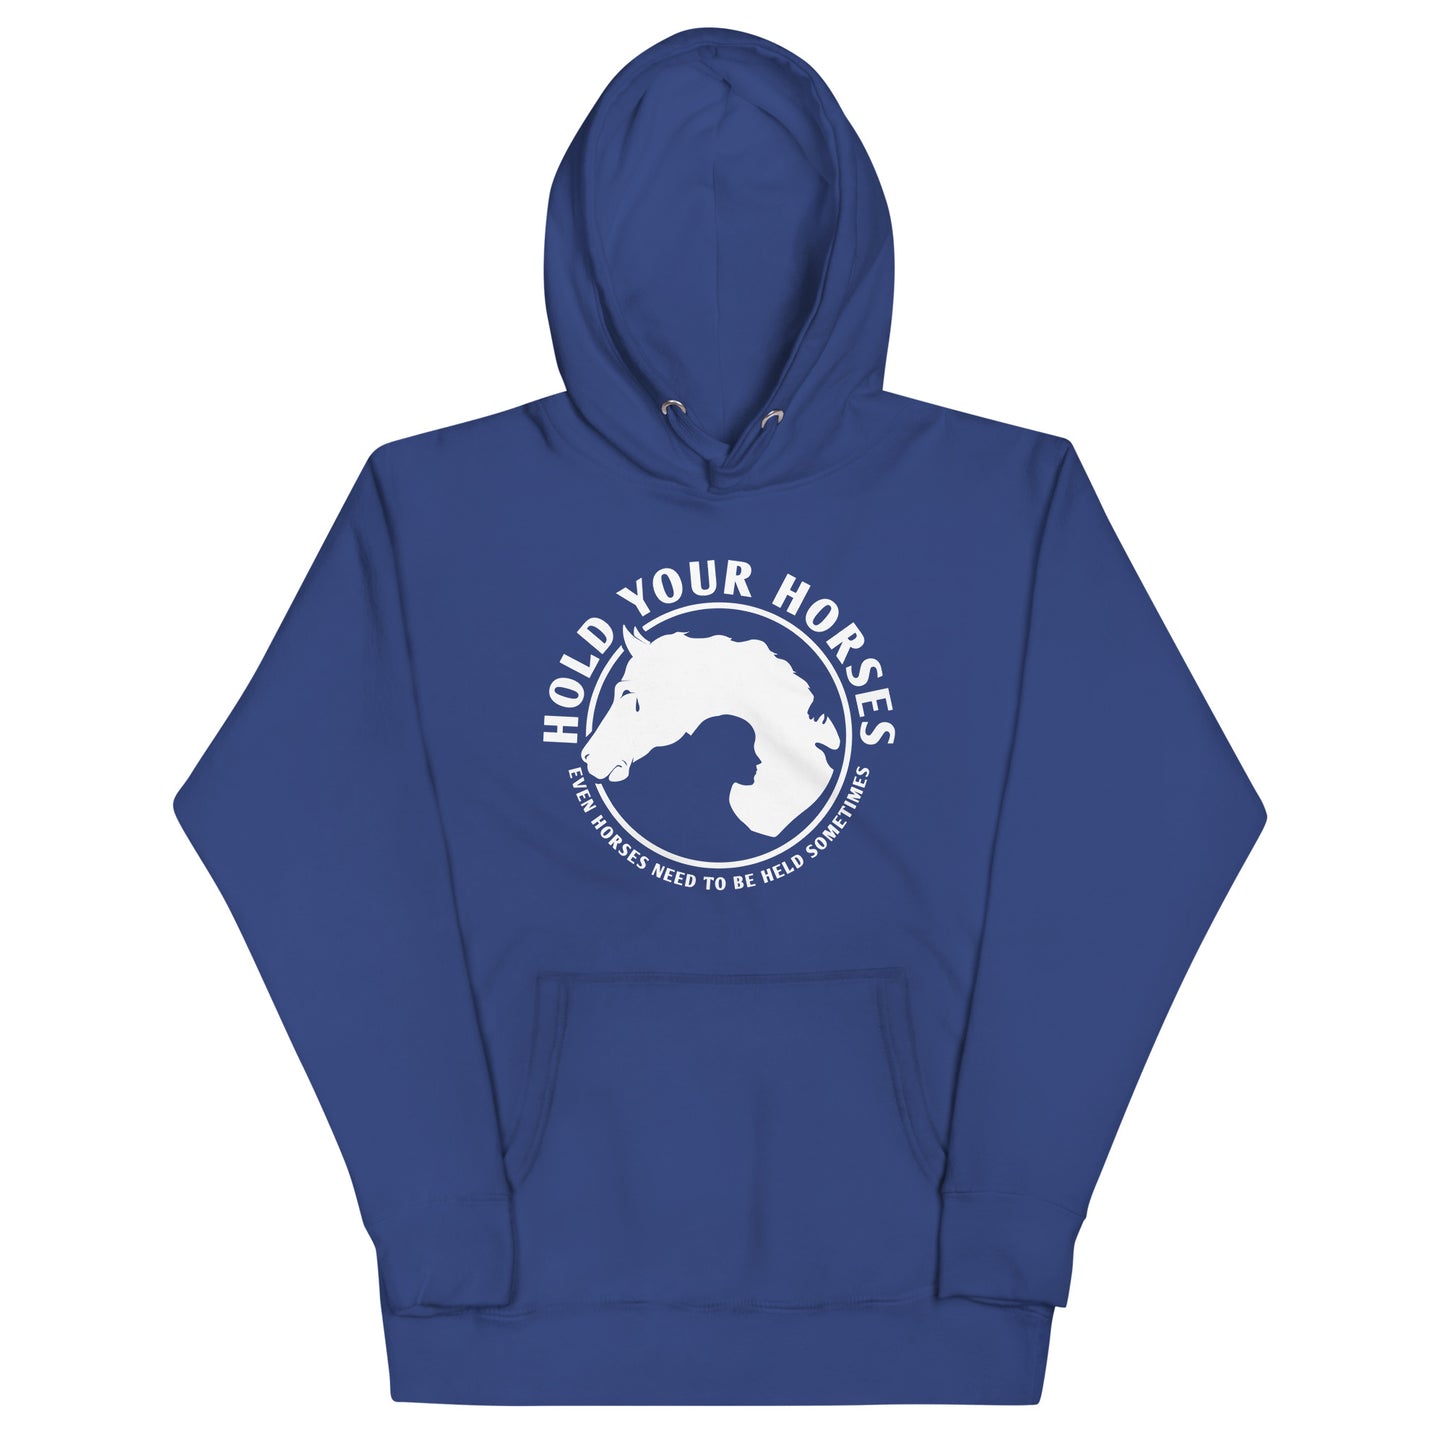 Hold Your Horses Unisex Hoodie